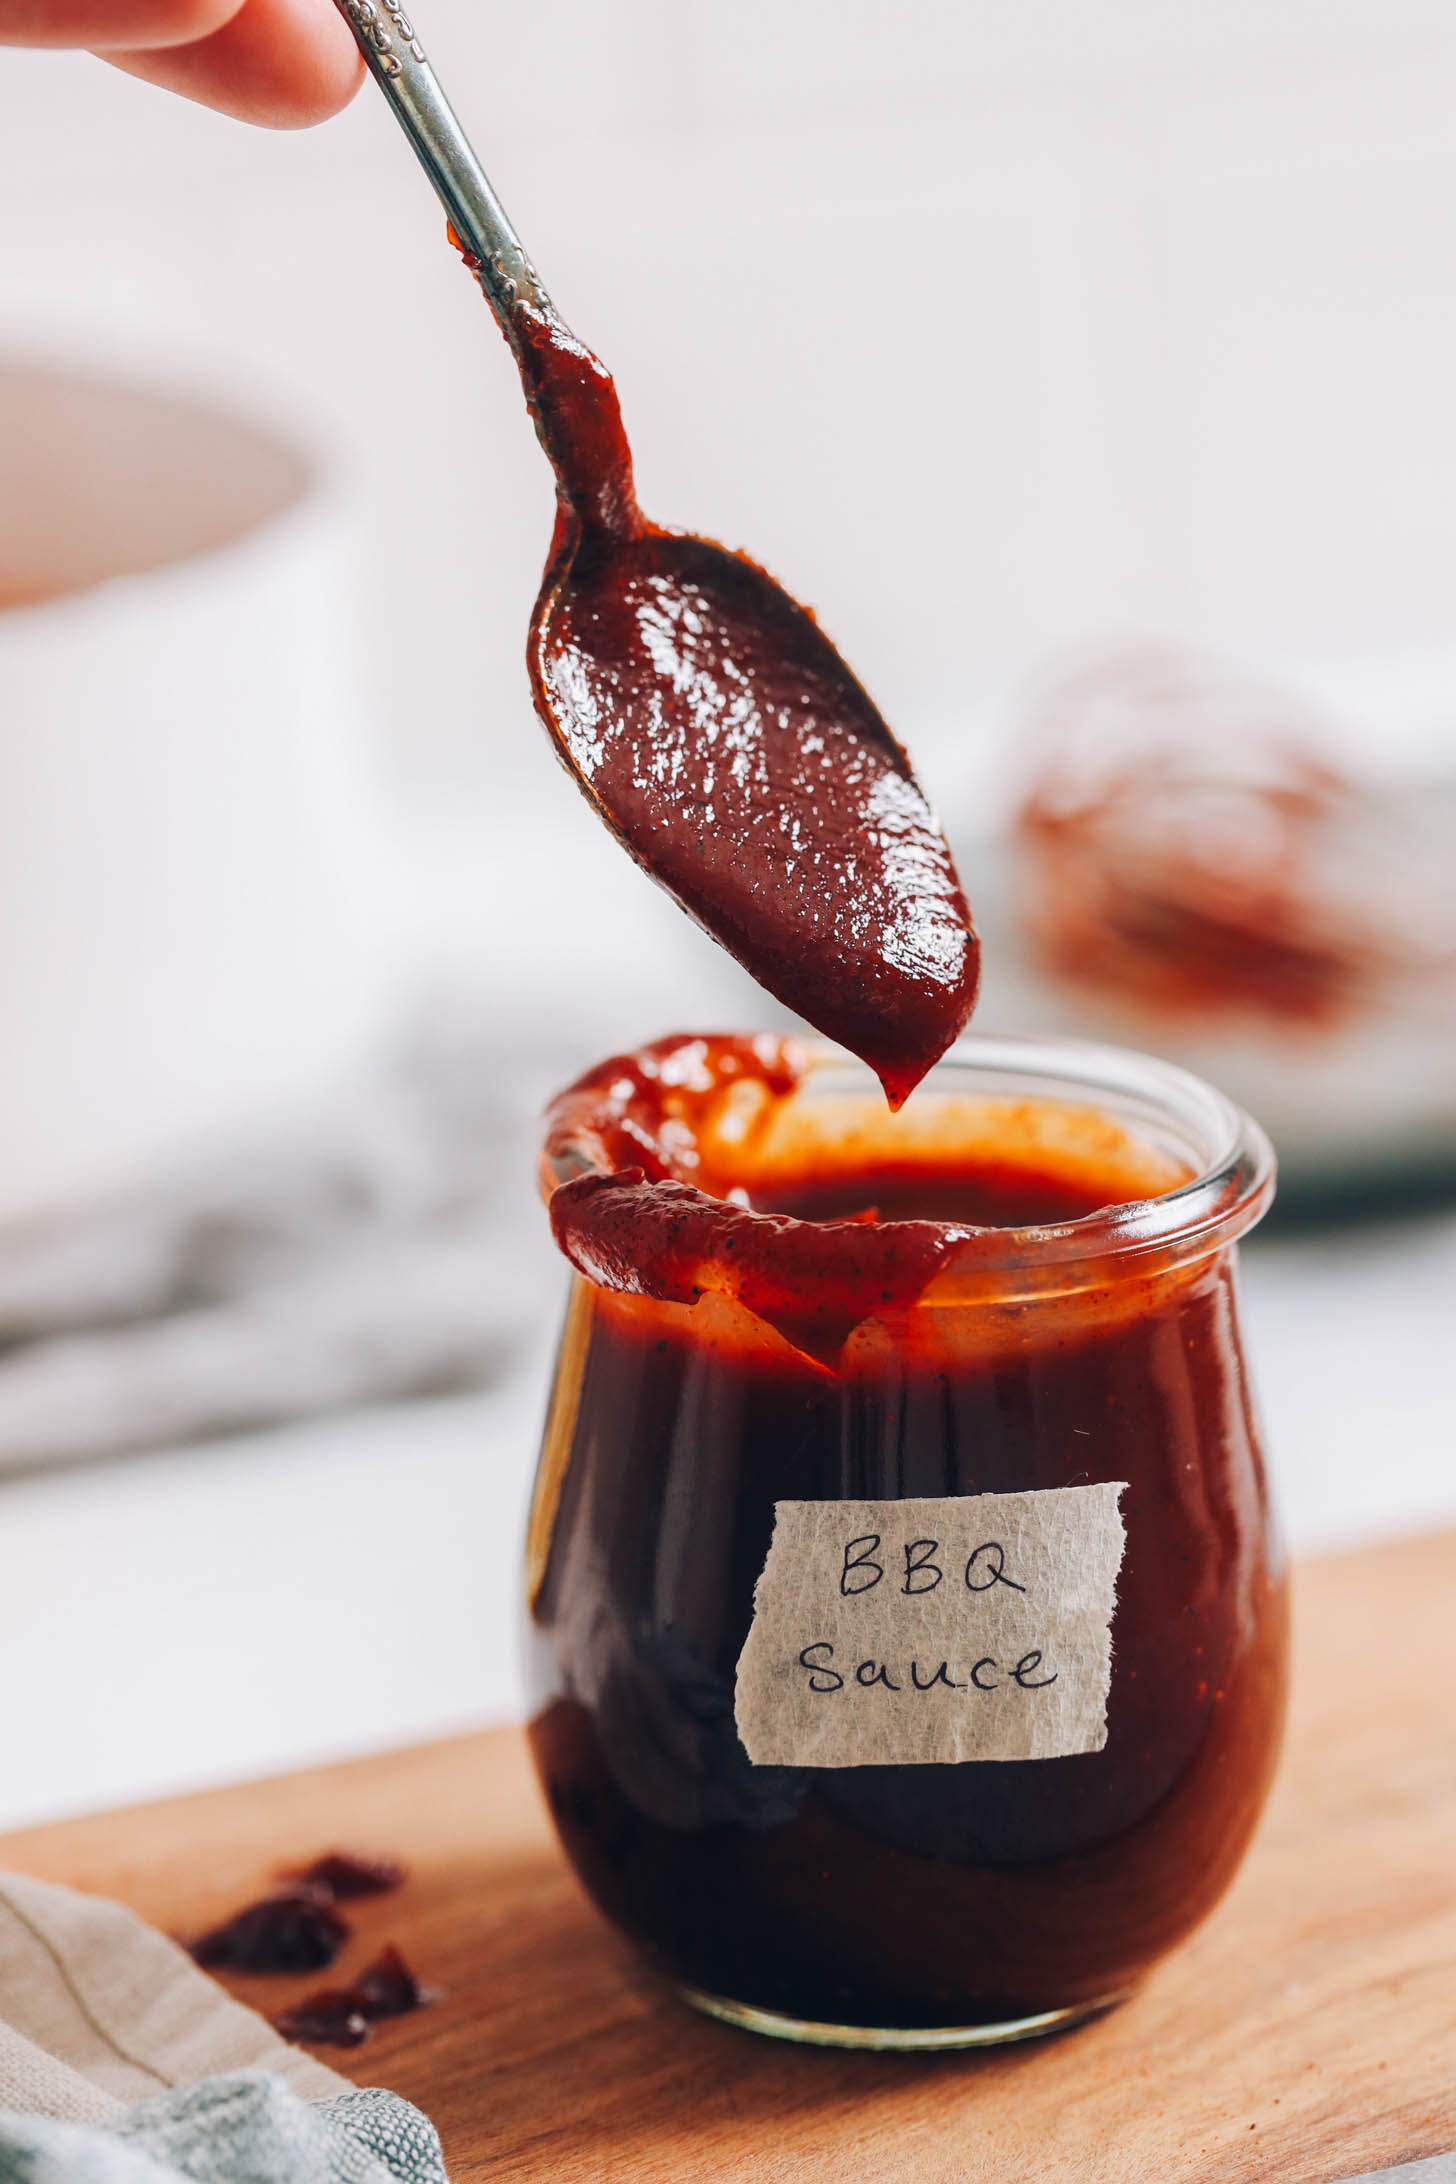 Holding a spoonful of homemade BBQ sauce over a jar with more sauce